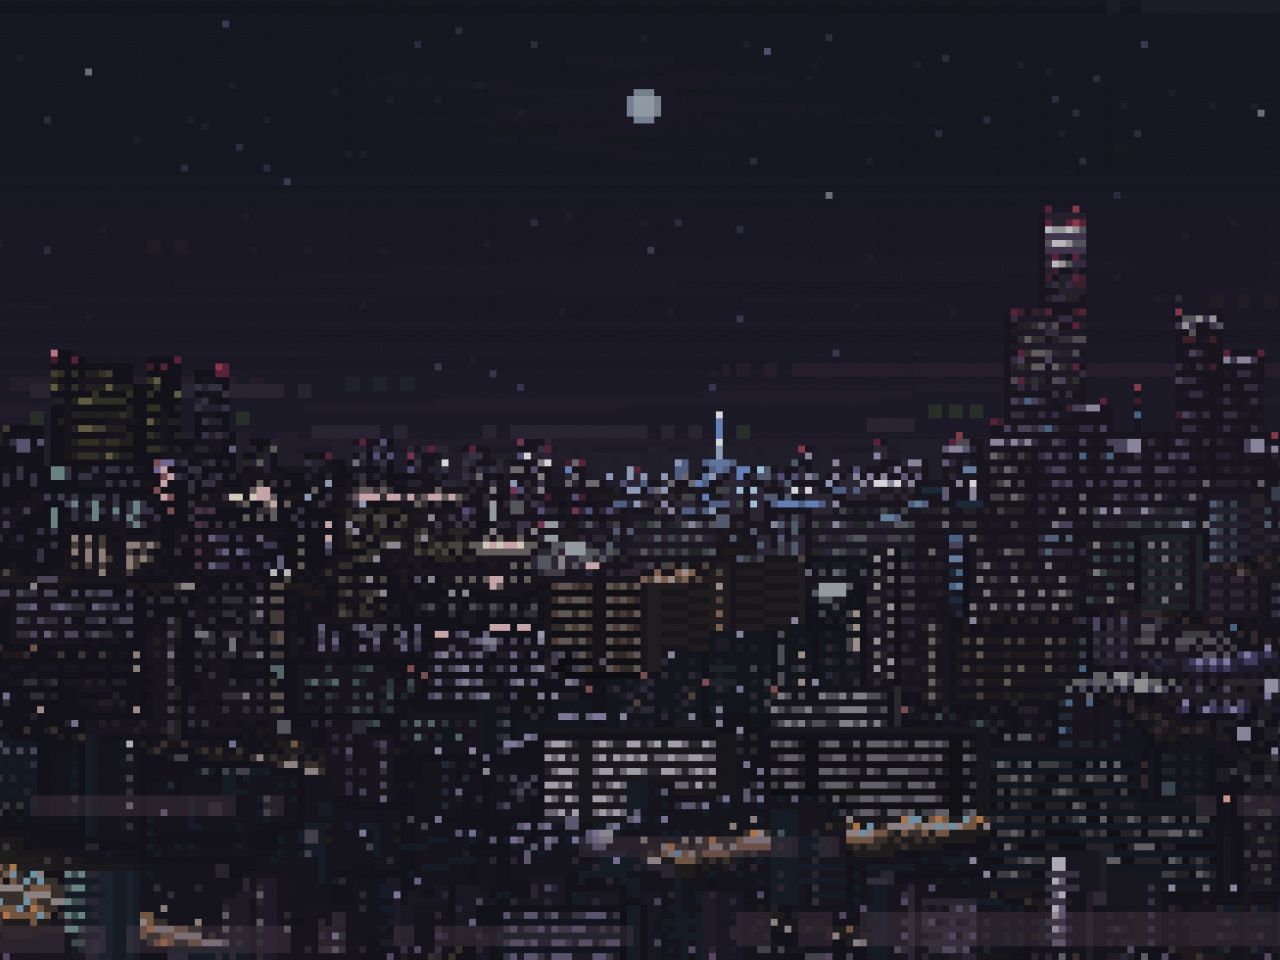 A city at night with the moon in it - Pixel art